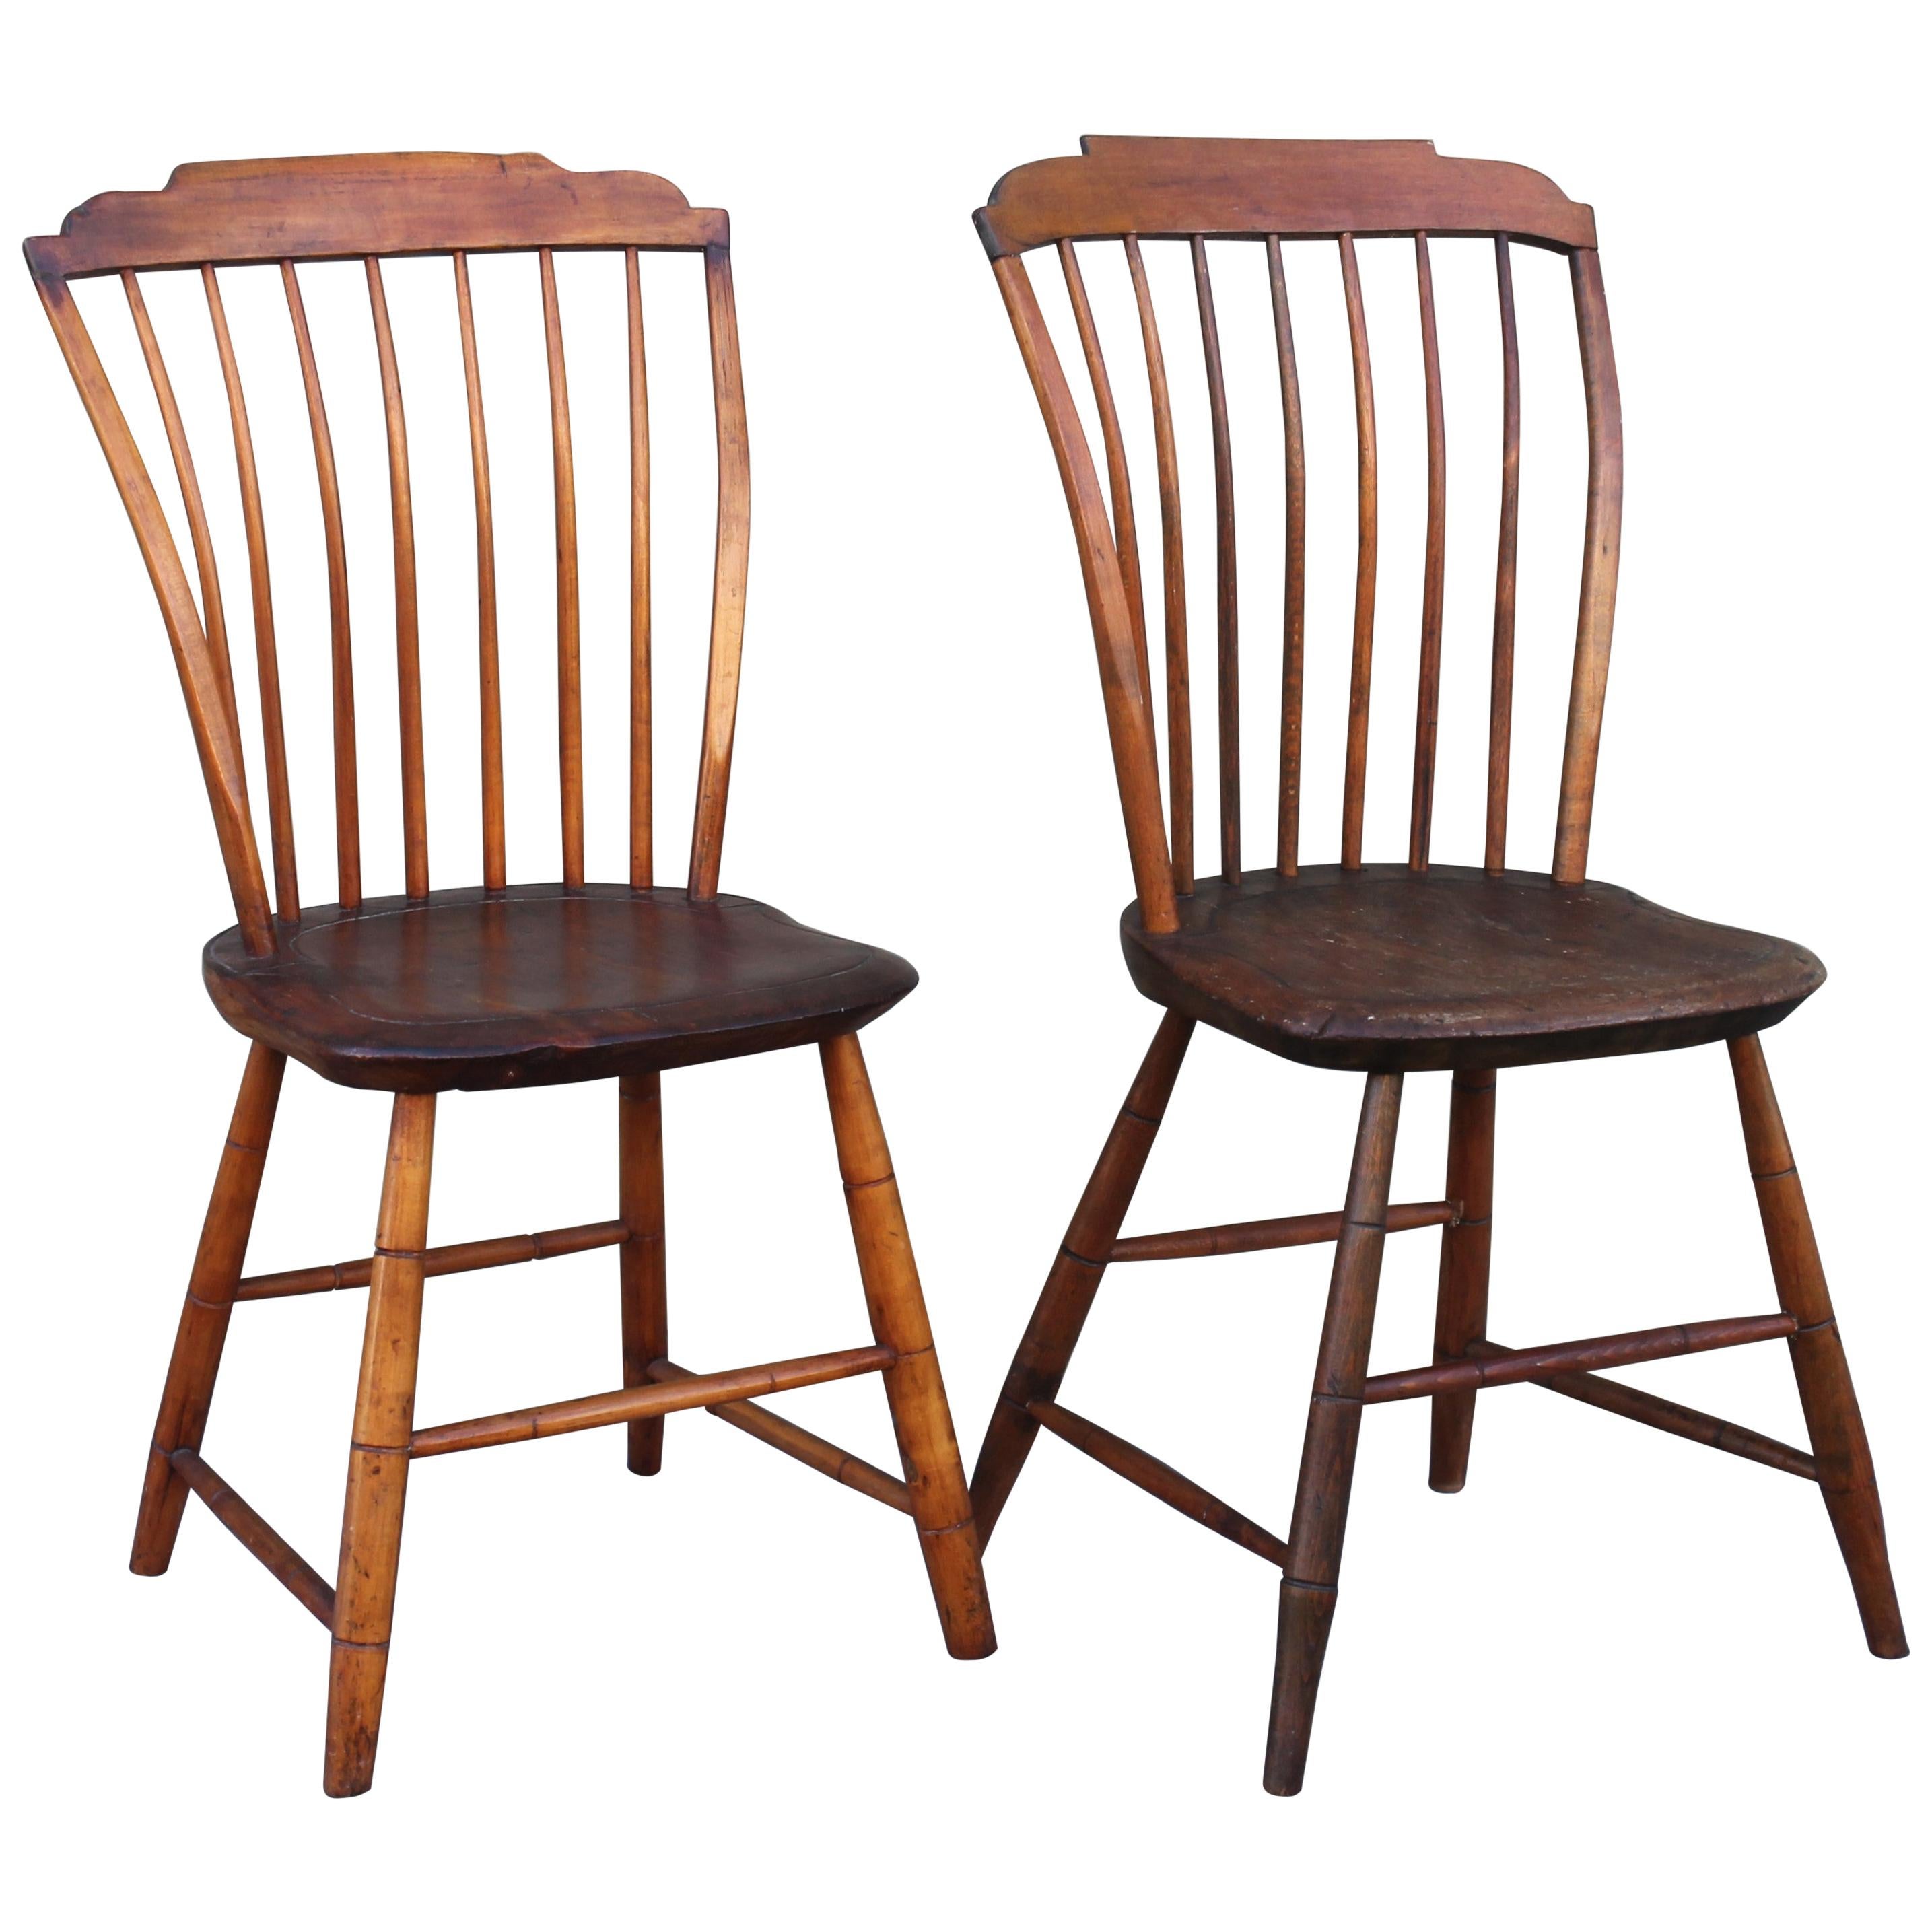 Pair of 18th Century Step Down Windsor Chairs